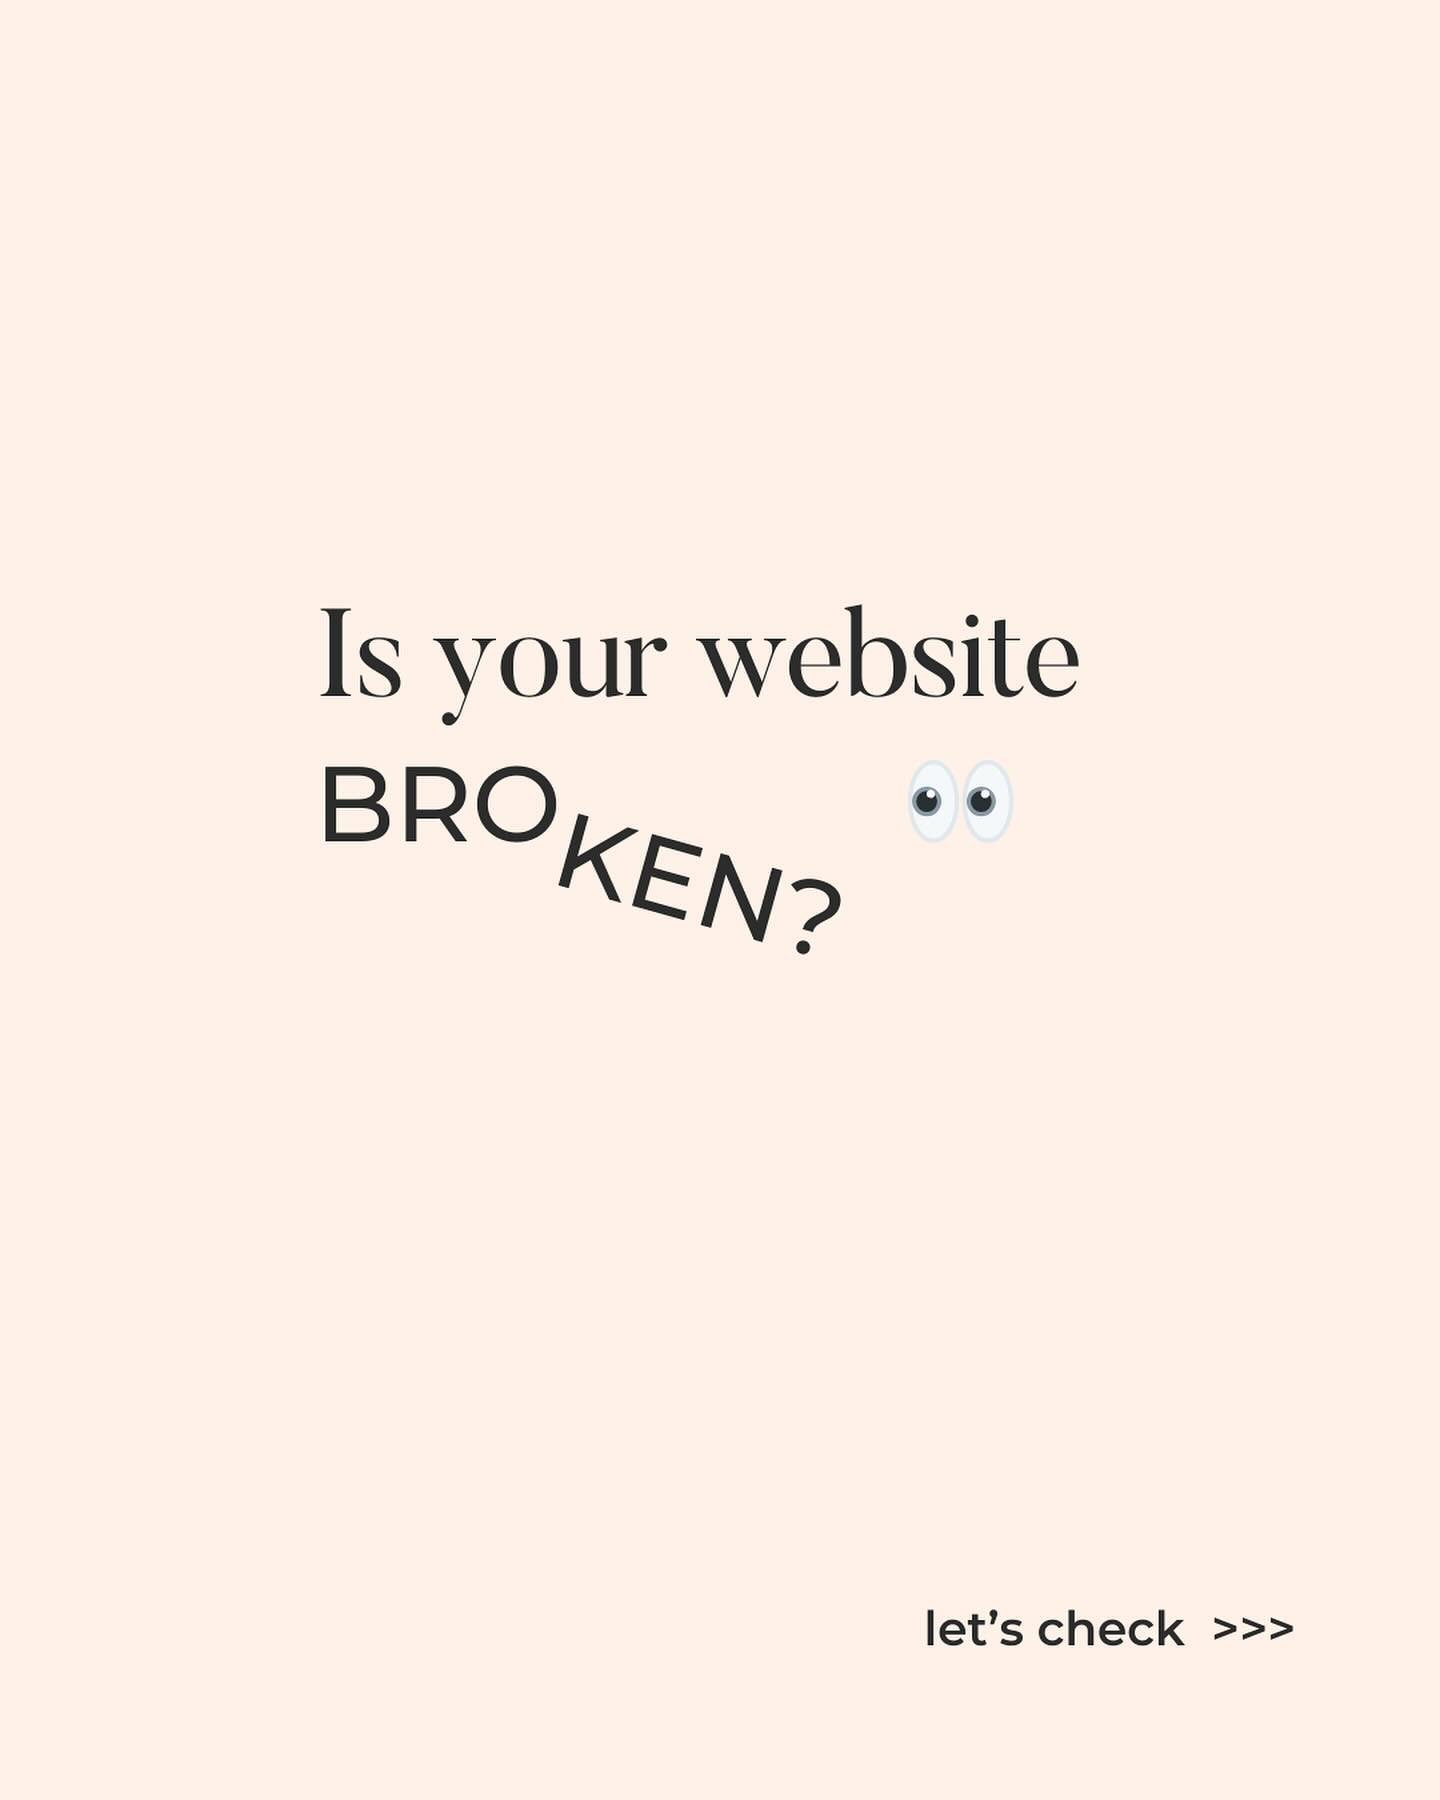 Let&rsquo;s FIX your website 🛠️

So many business owners neglect or ignore their website because it&rsquo;s not their zone of genius&hellip;

But here&rsquo;s the thing &mdash; your website should be working FOR you, generating leads and sales aroun